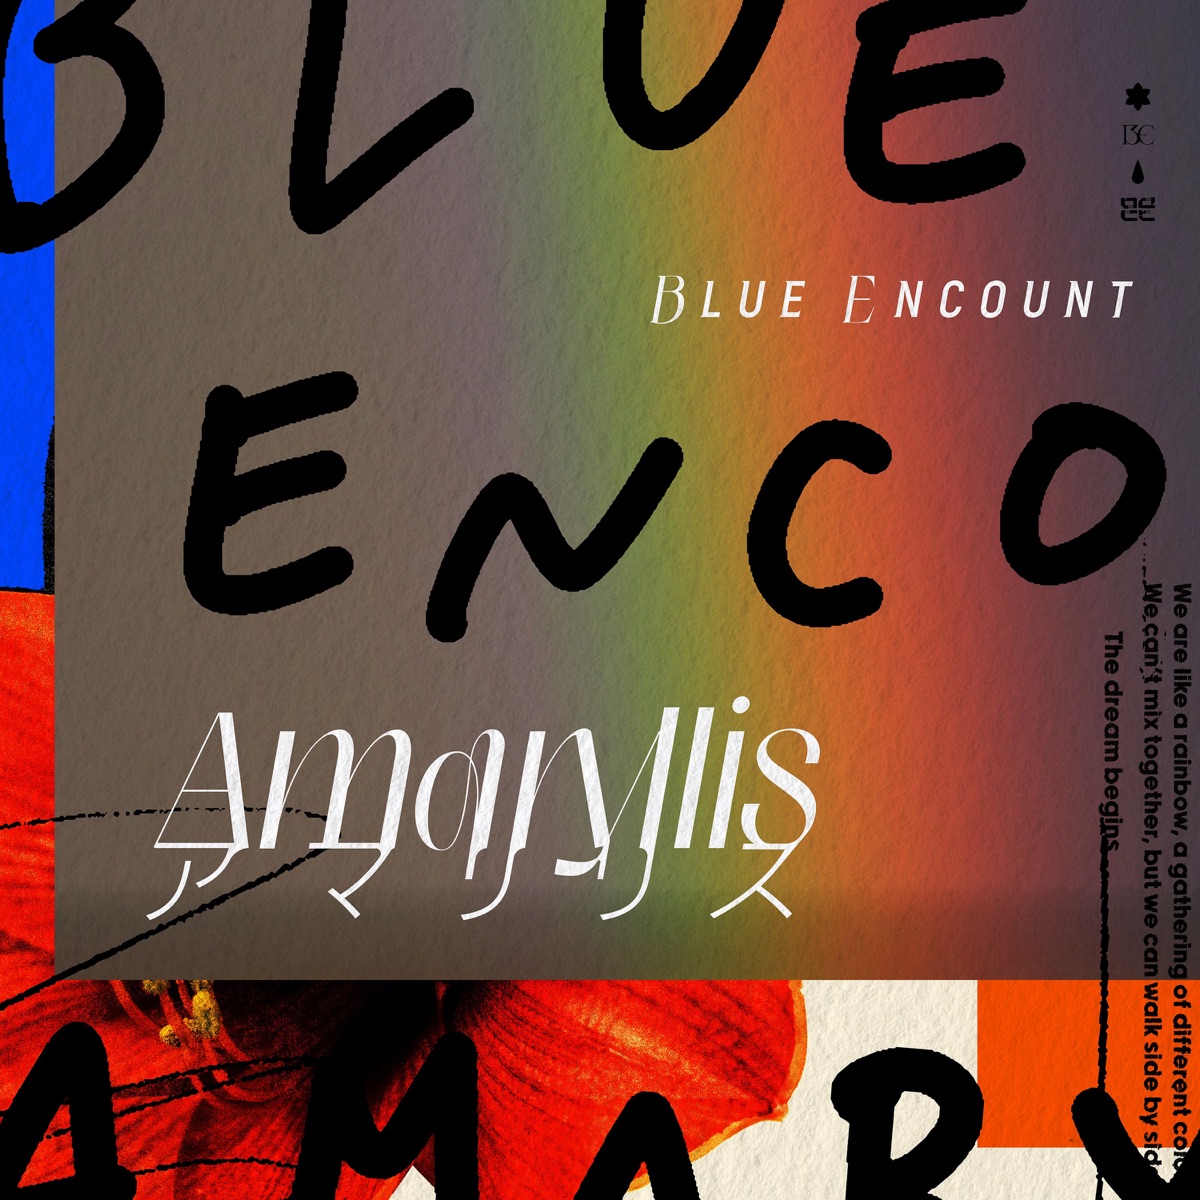 Cover art for『BLUE ENCOUNT - ghosted』from the release『Amaryllis